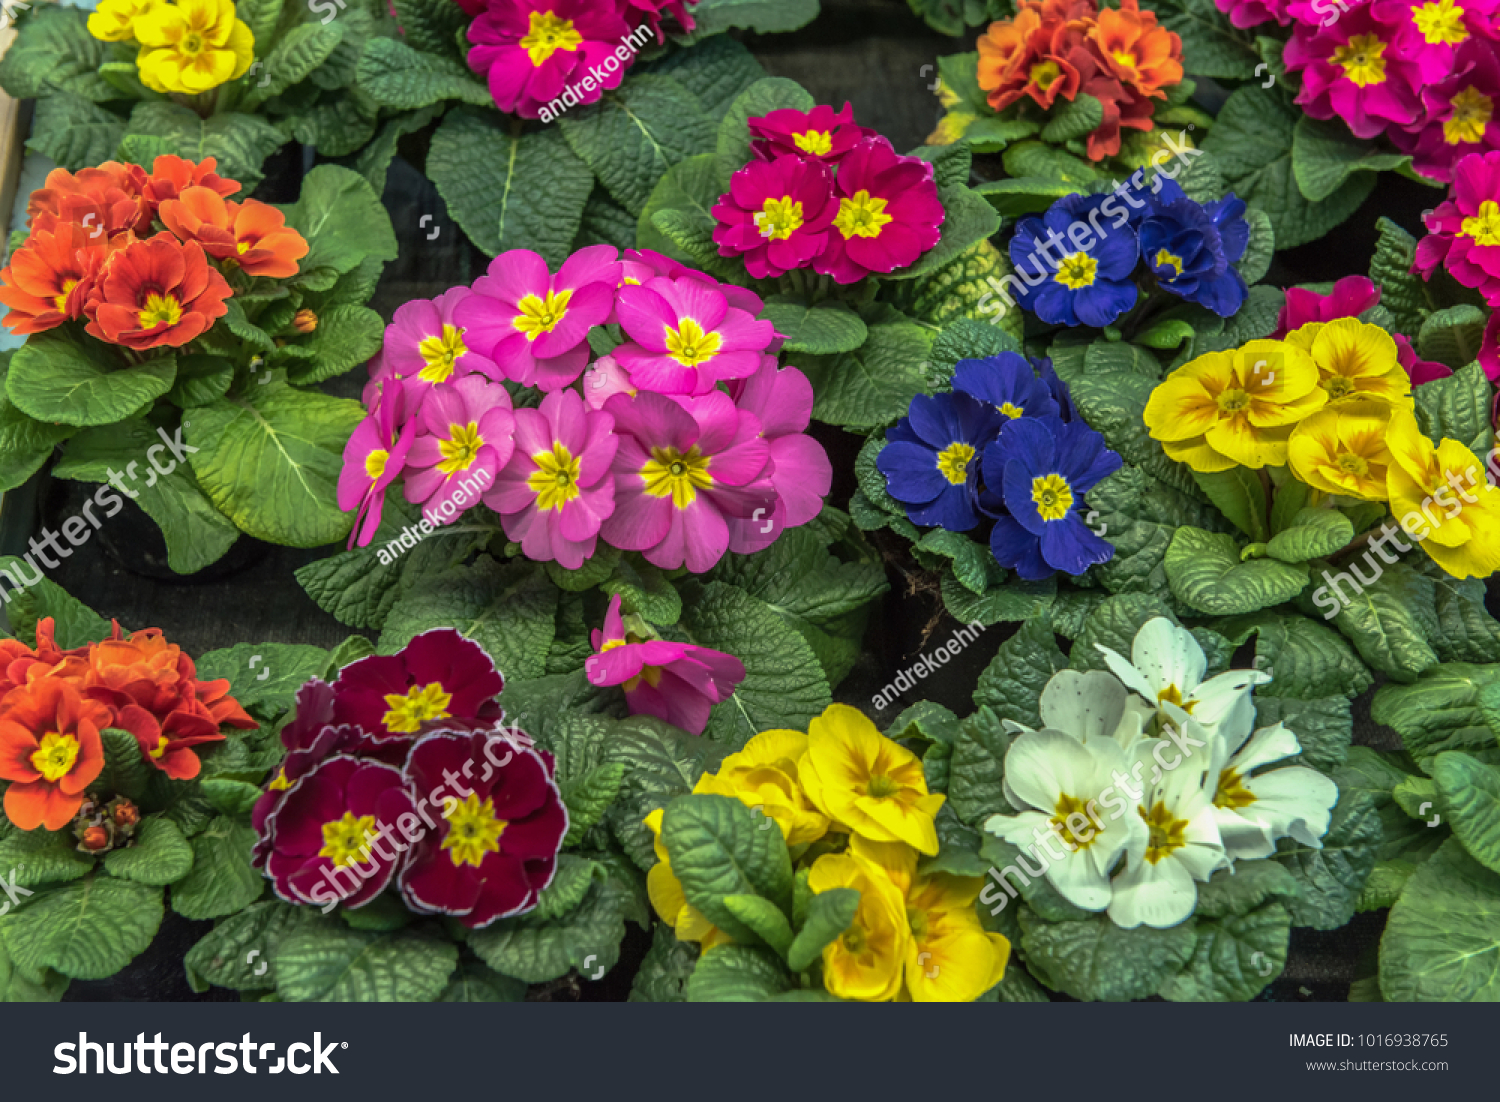 Primrose (primula vulgaris) is an early spring flower. They have a high variety of colors and can be used both as a balcony plant and bedding plant. They are perennial and beautiful. Concept: flowers #1016938765